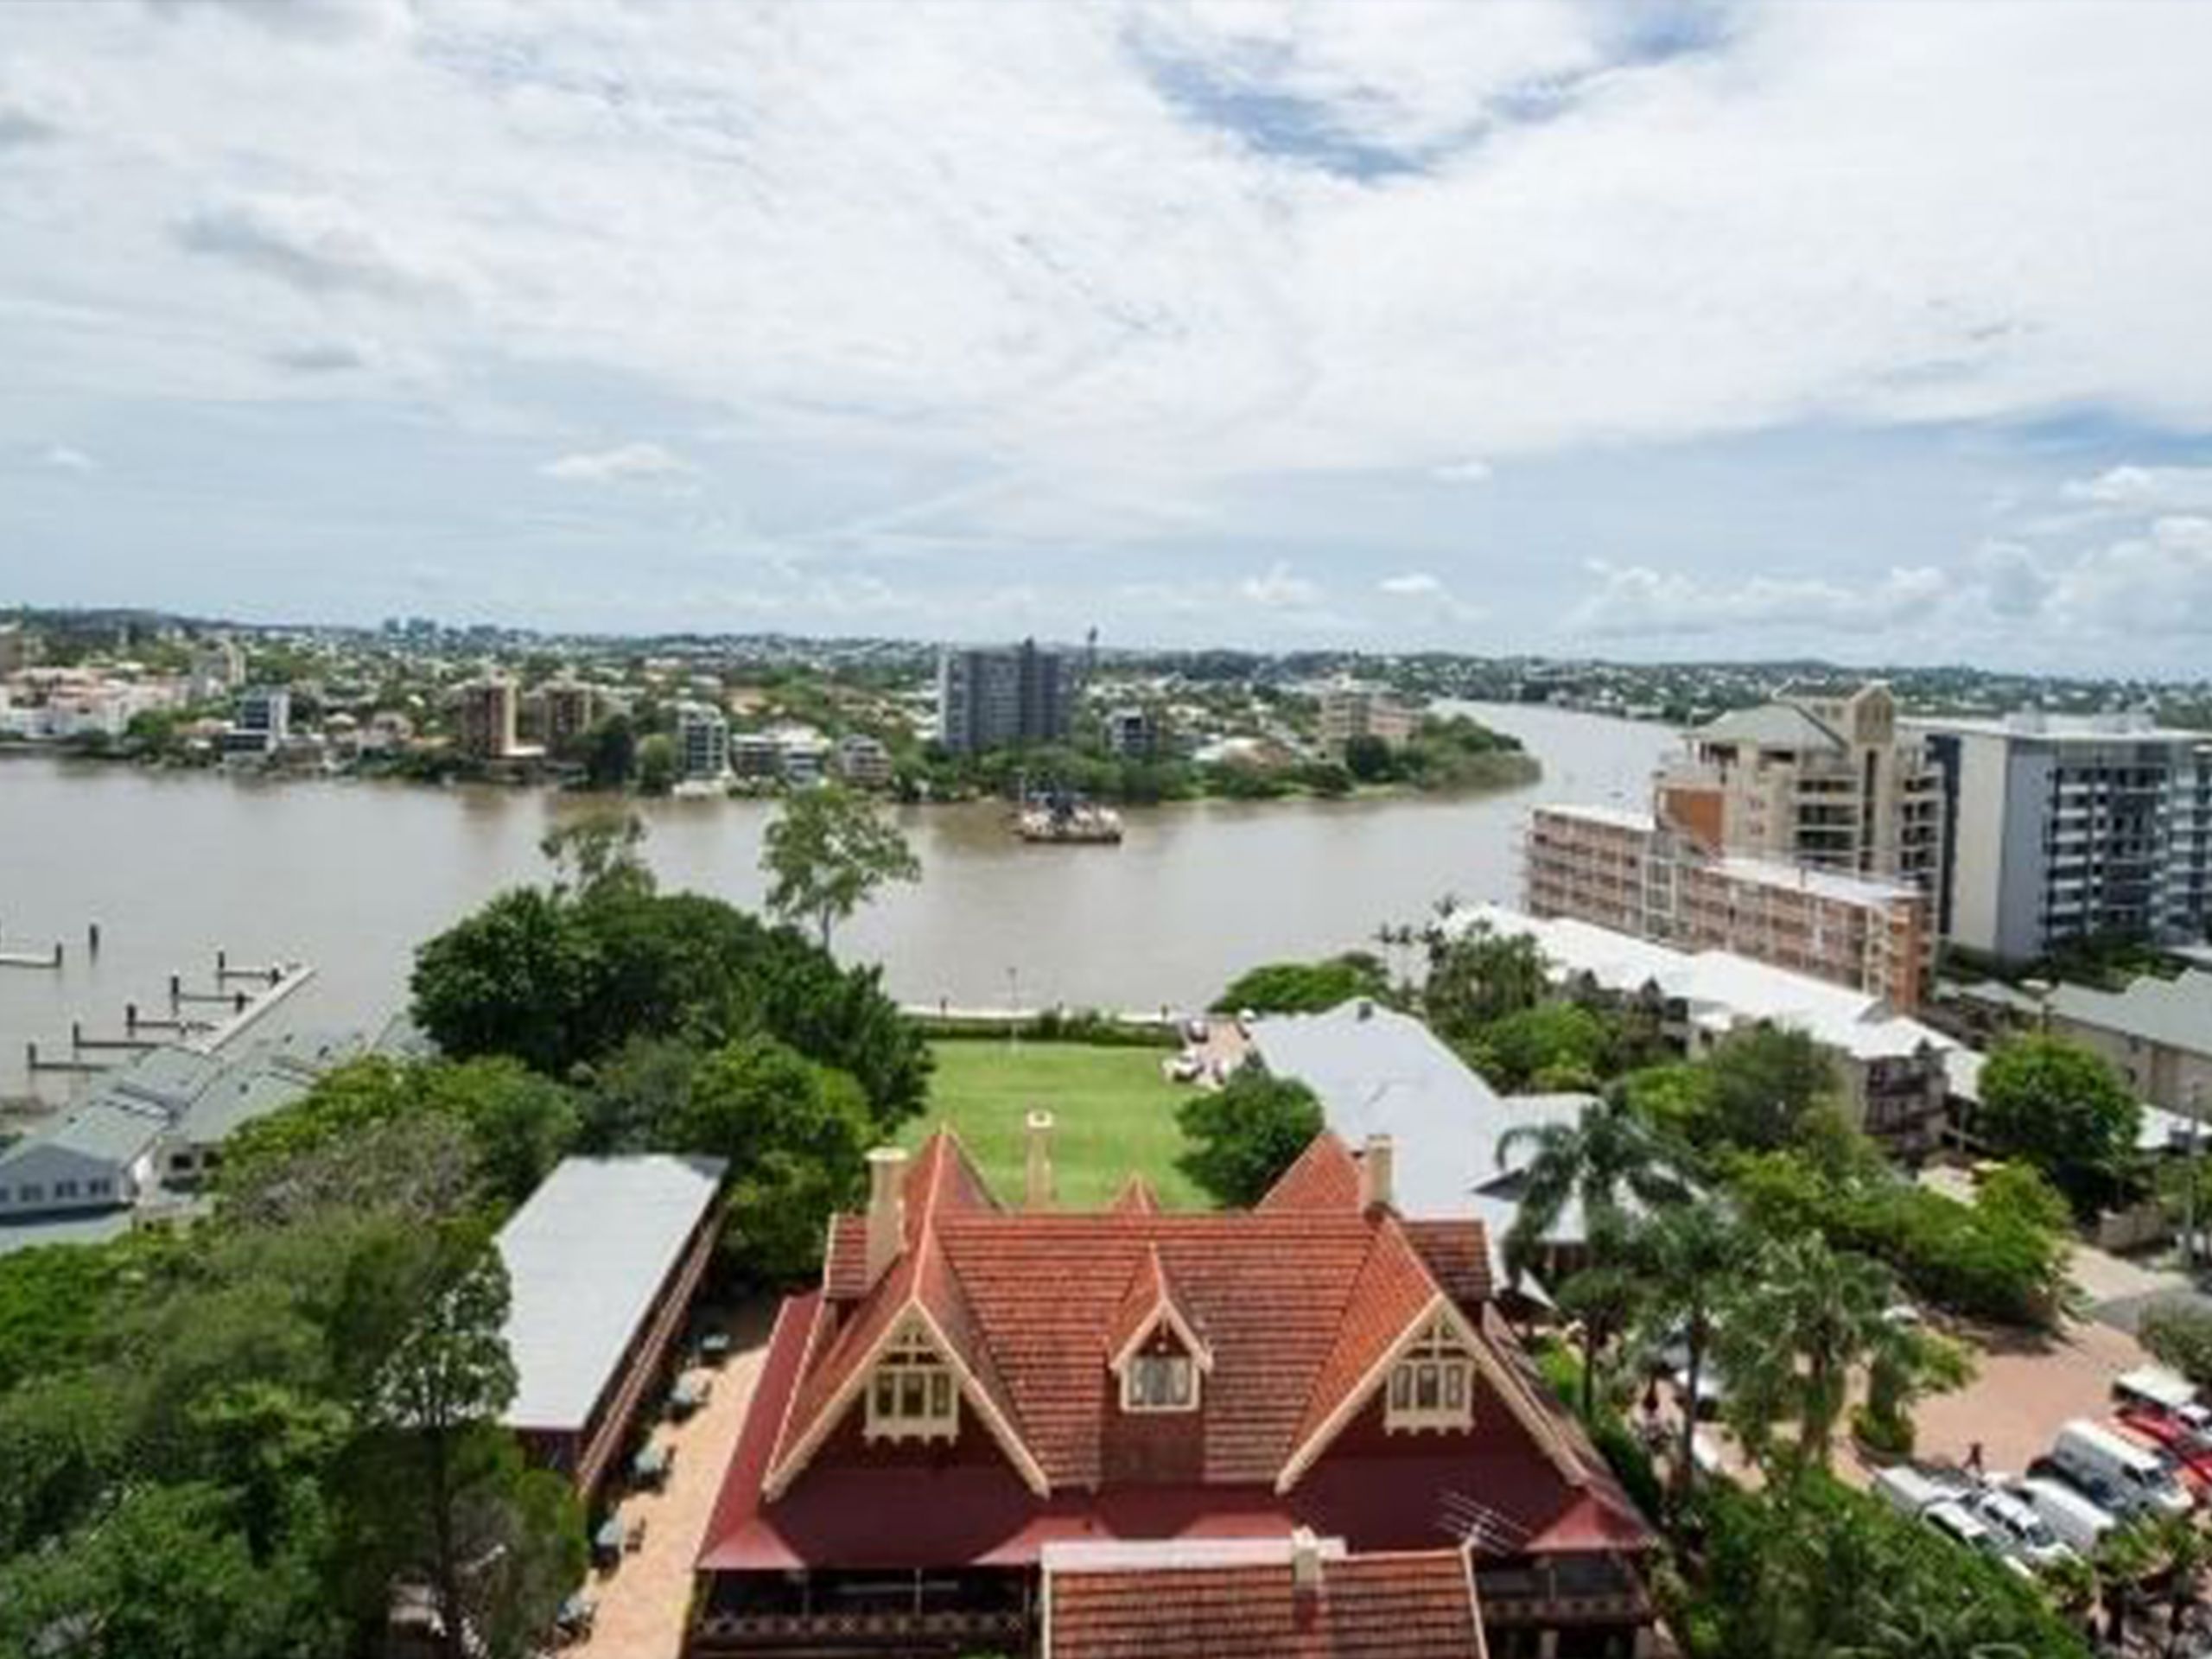 Shafston Student Apartment On Site, Brisbane River View